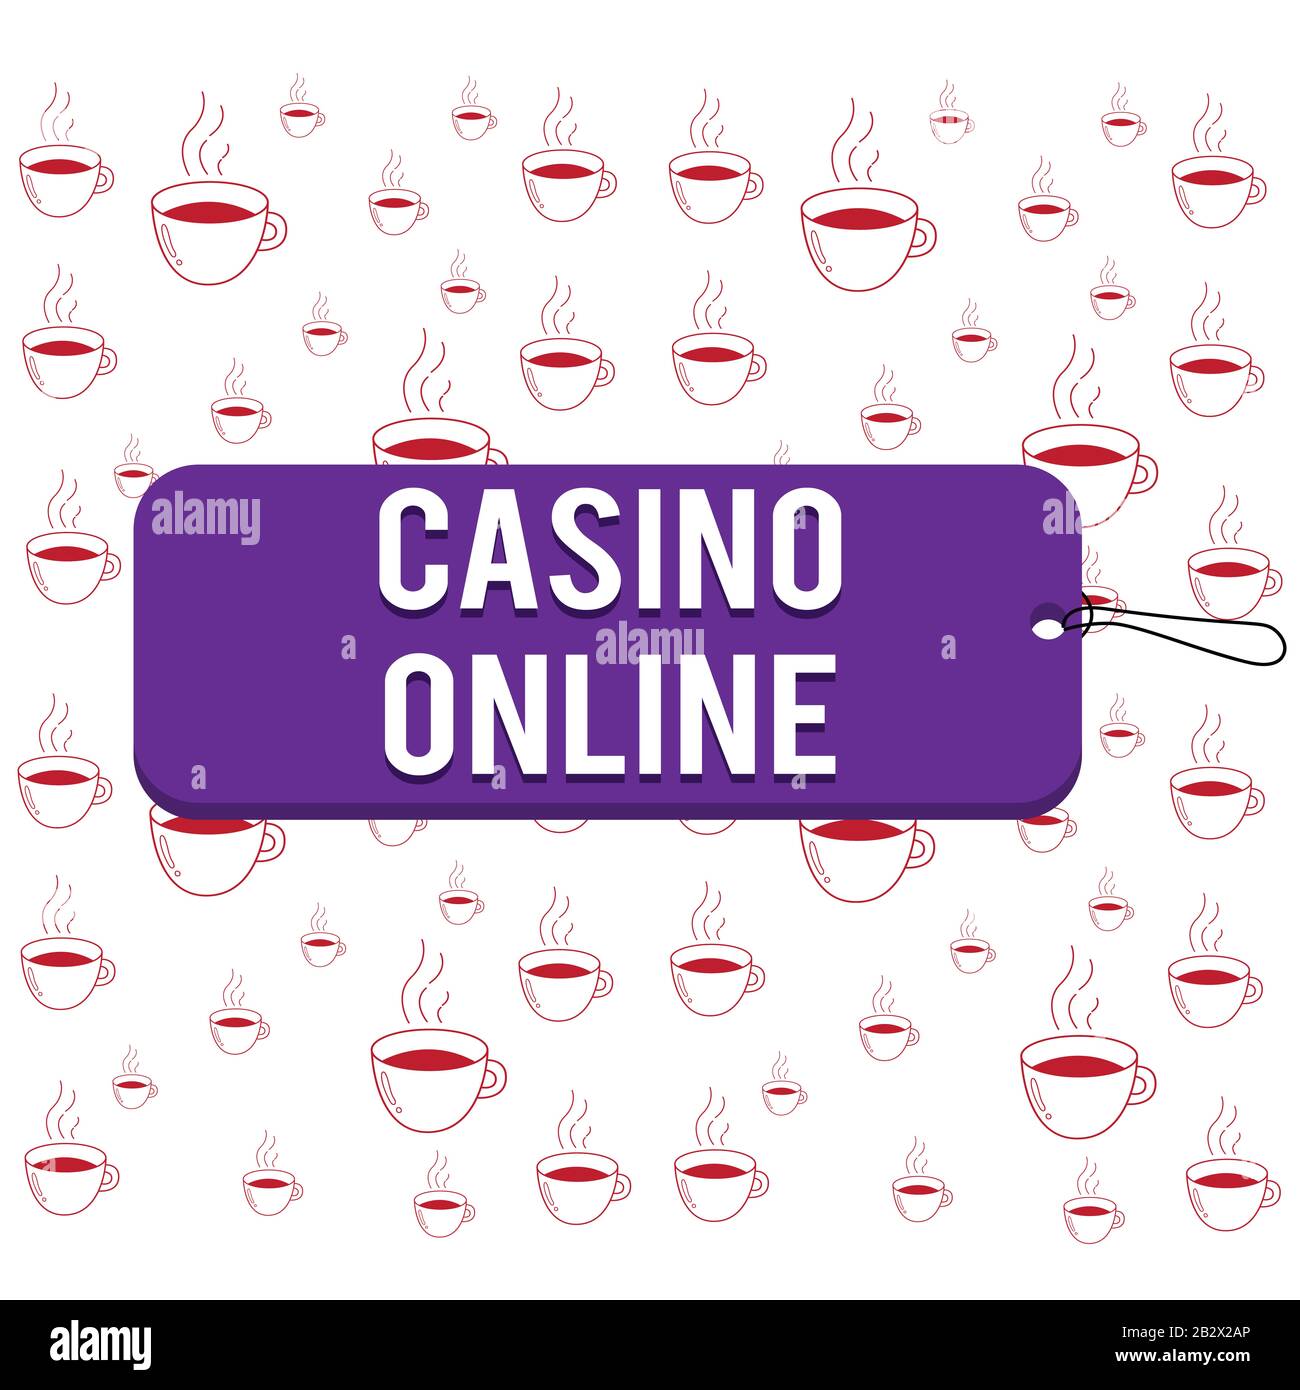 Writing note showing Casino Online. Business concept for gamblers can play and wager on casino games through online Label tag badge rectangle shaped e Stock Photo